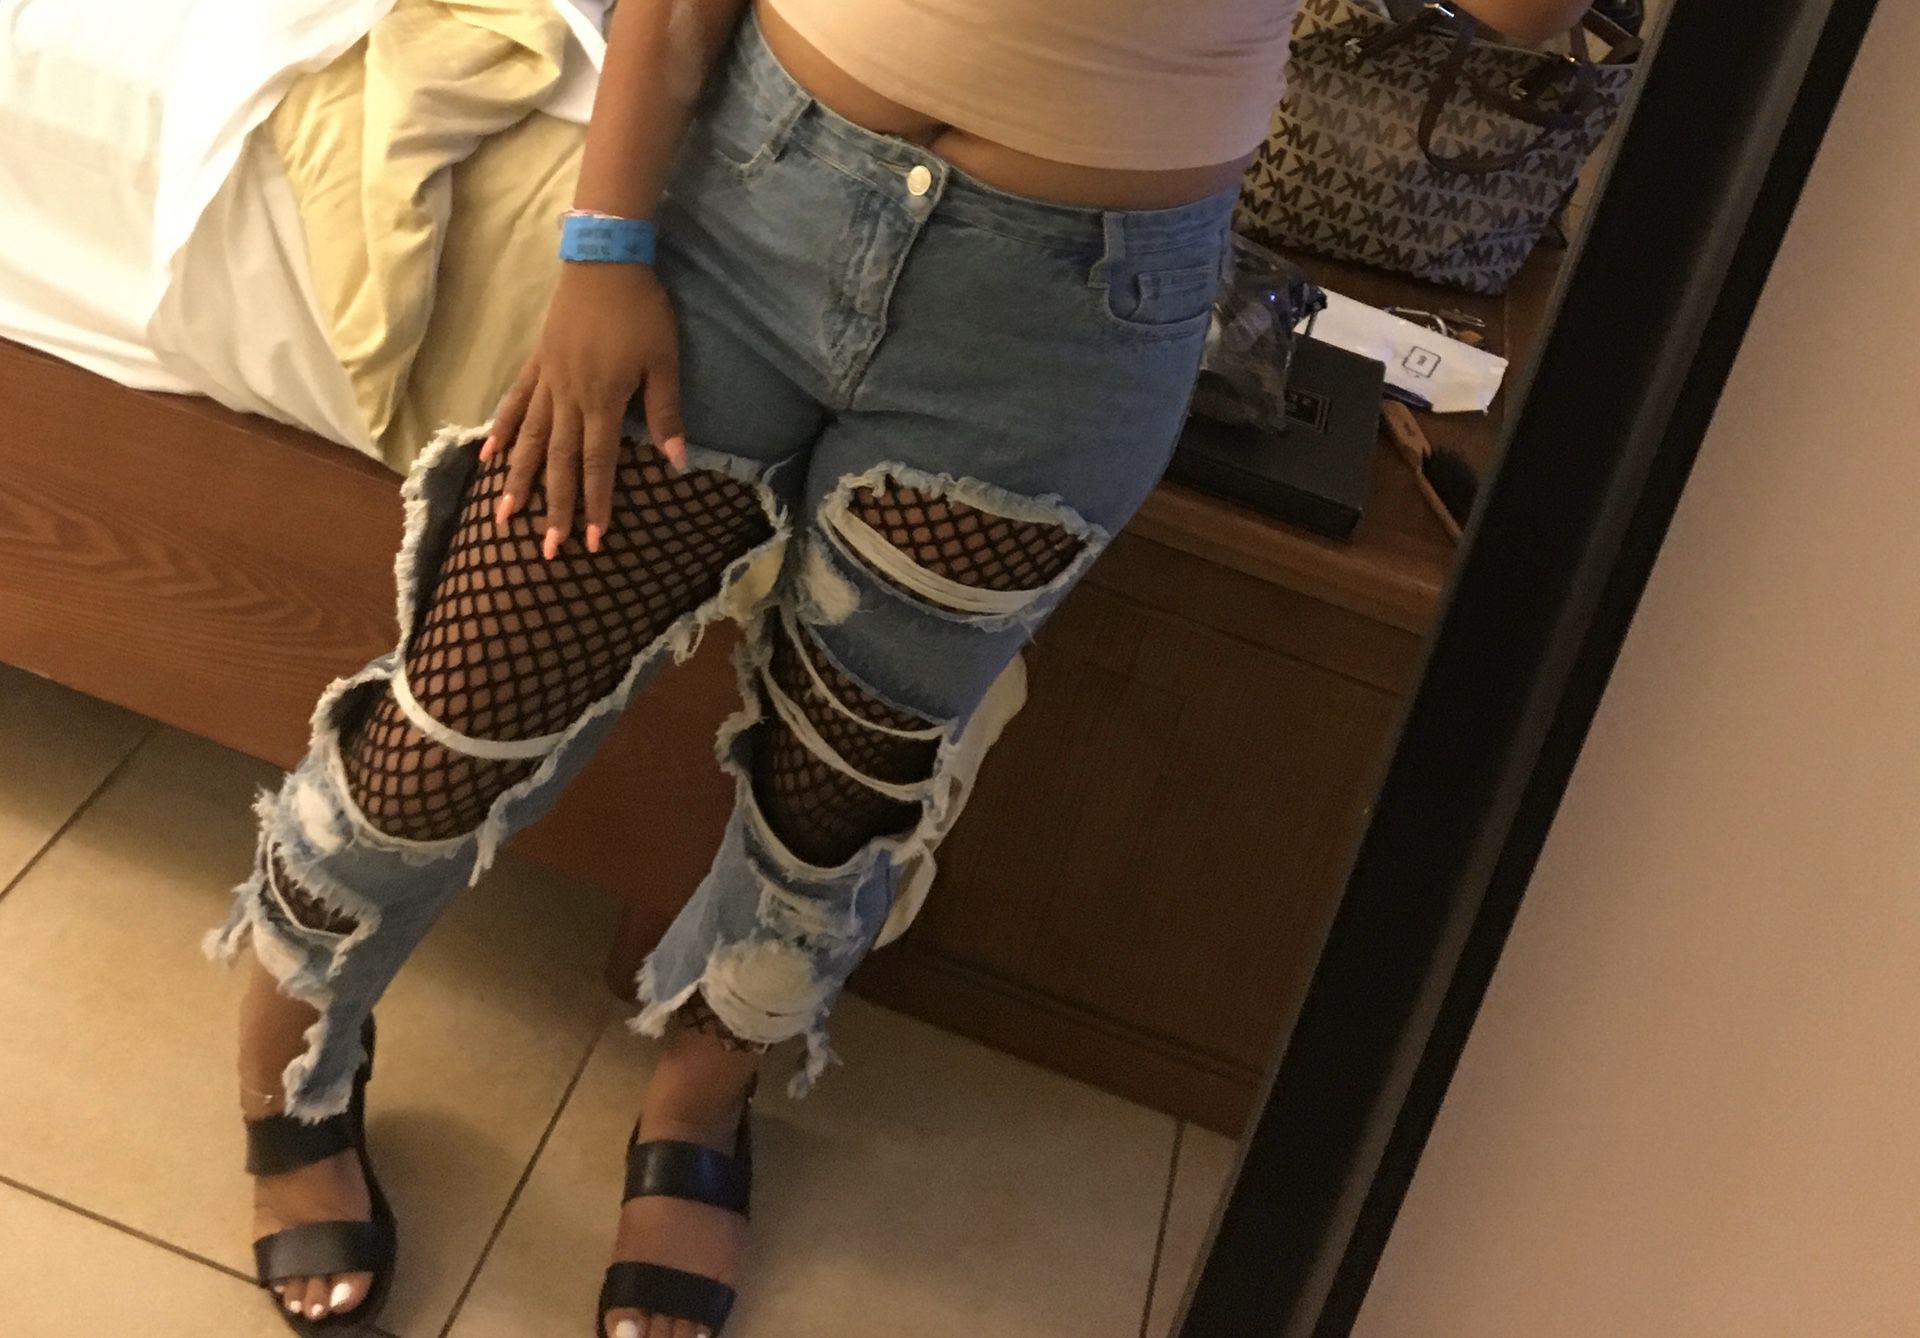 Distressed jeans with fishnet stockings